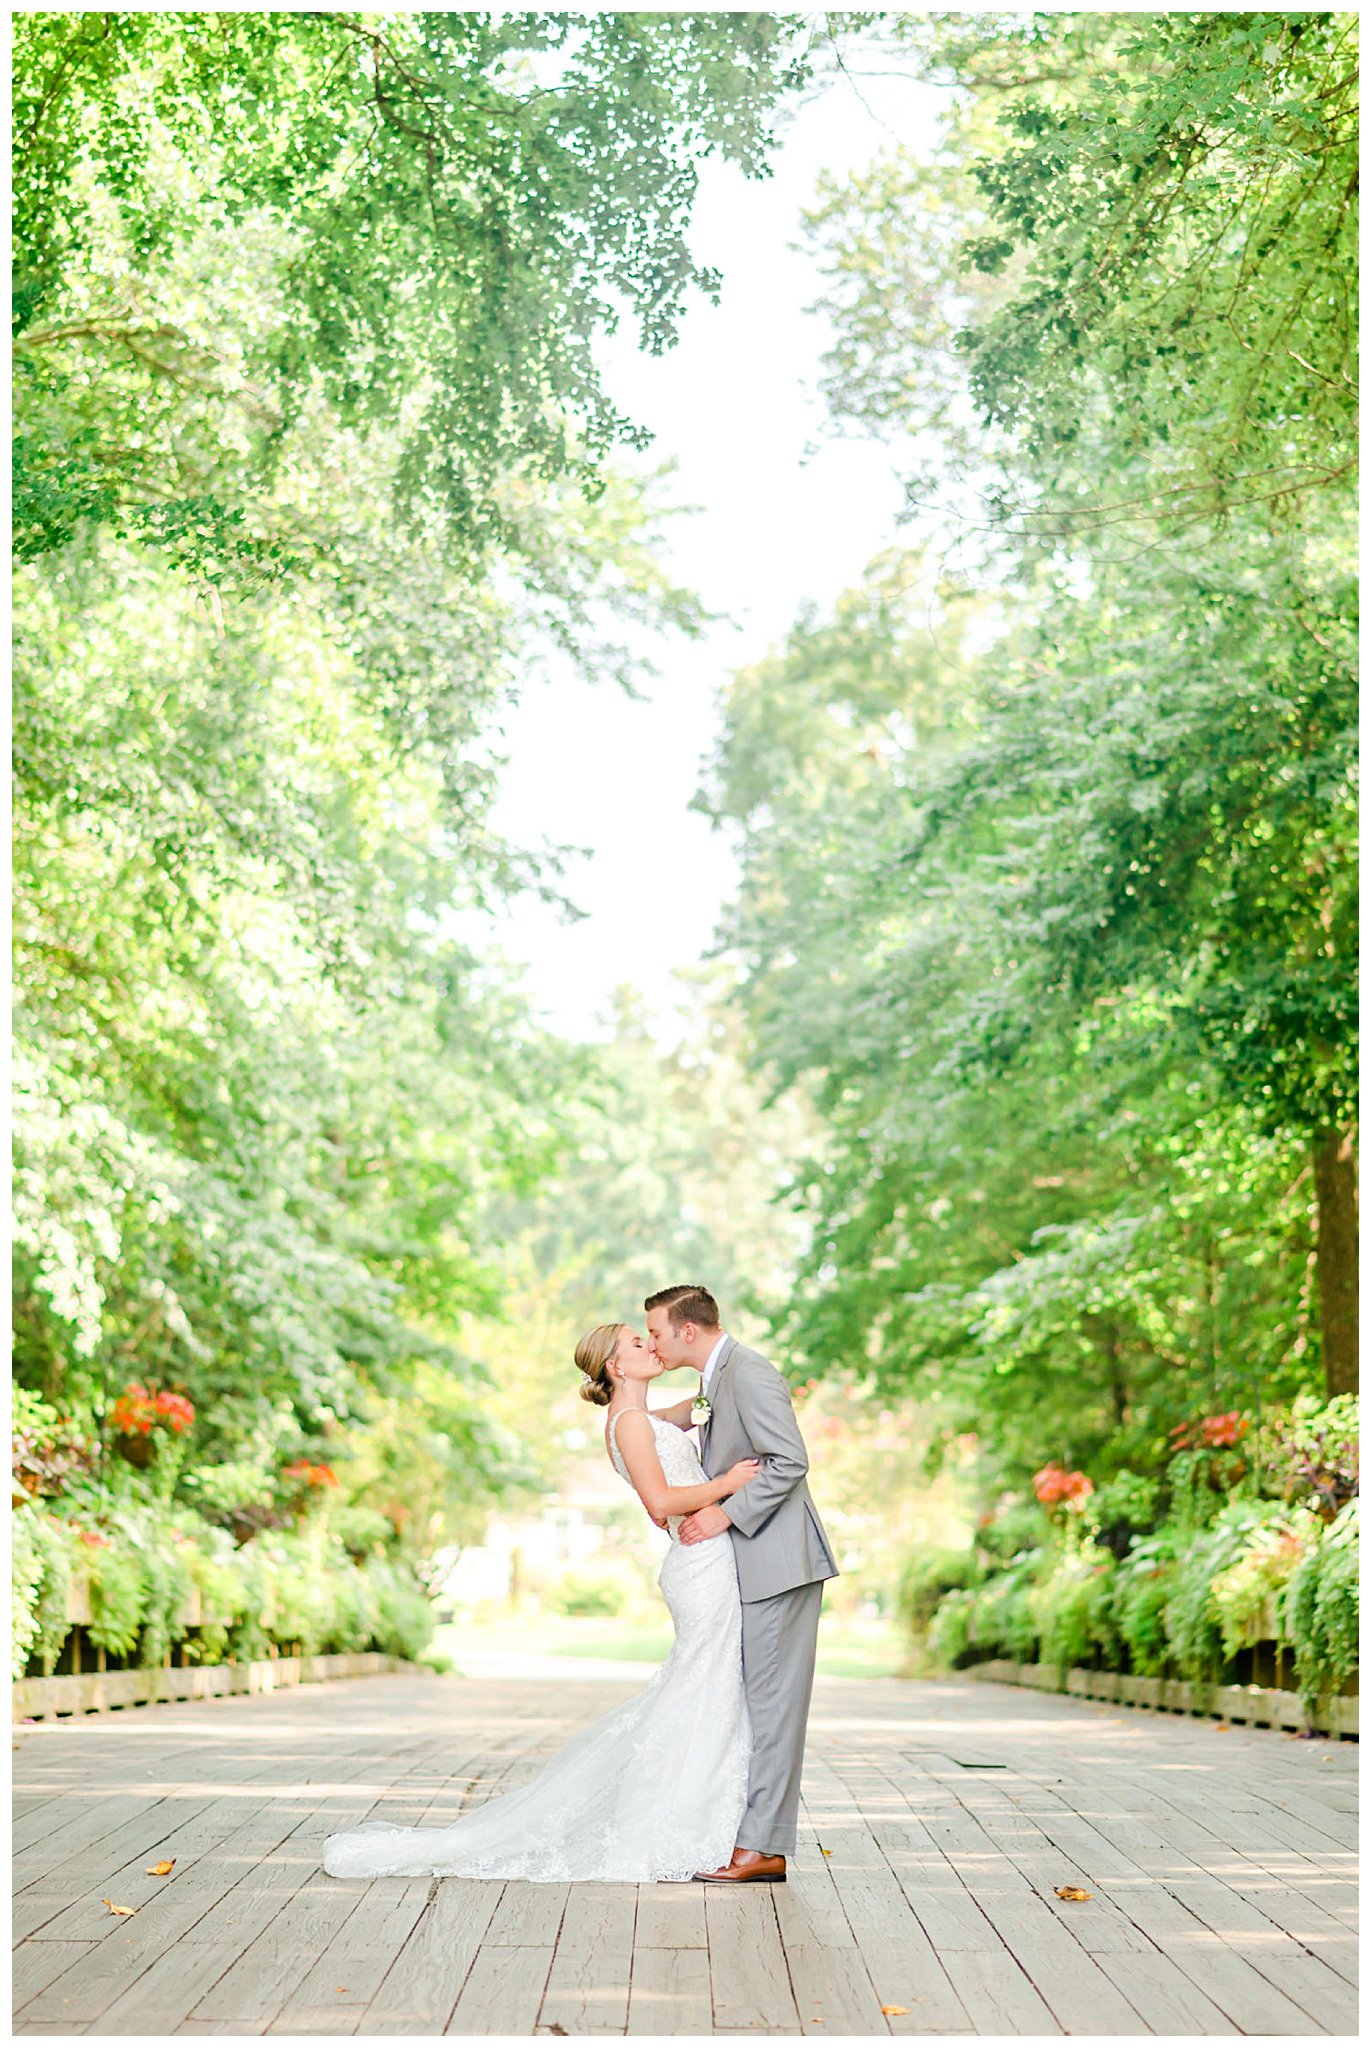 bride and groom kiss in gardens of The Club at Baywood

The Clubhouse At Baywood Wedding